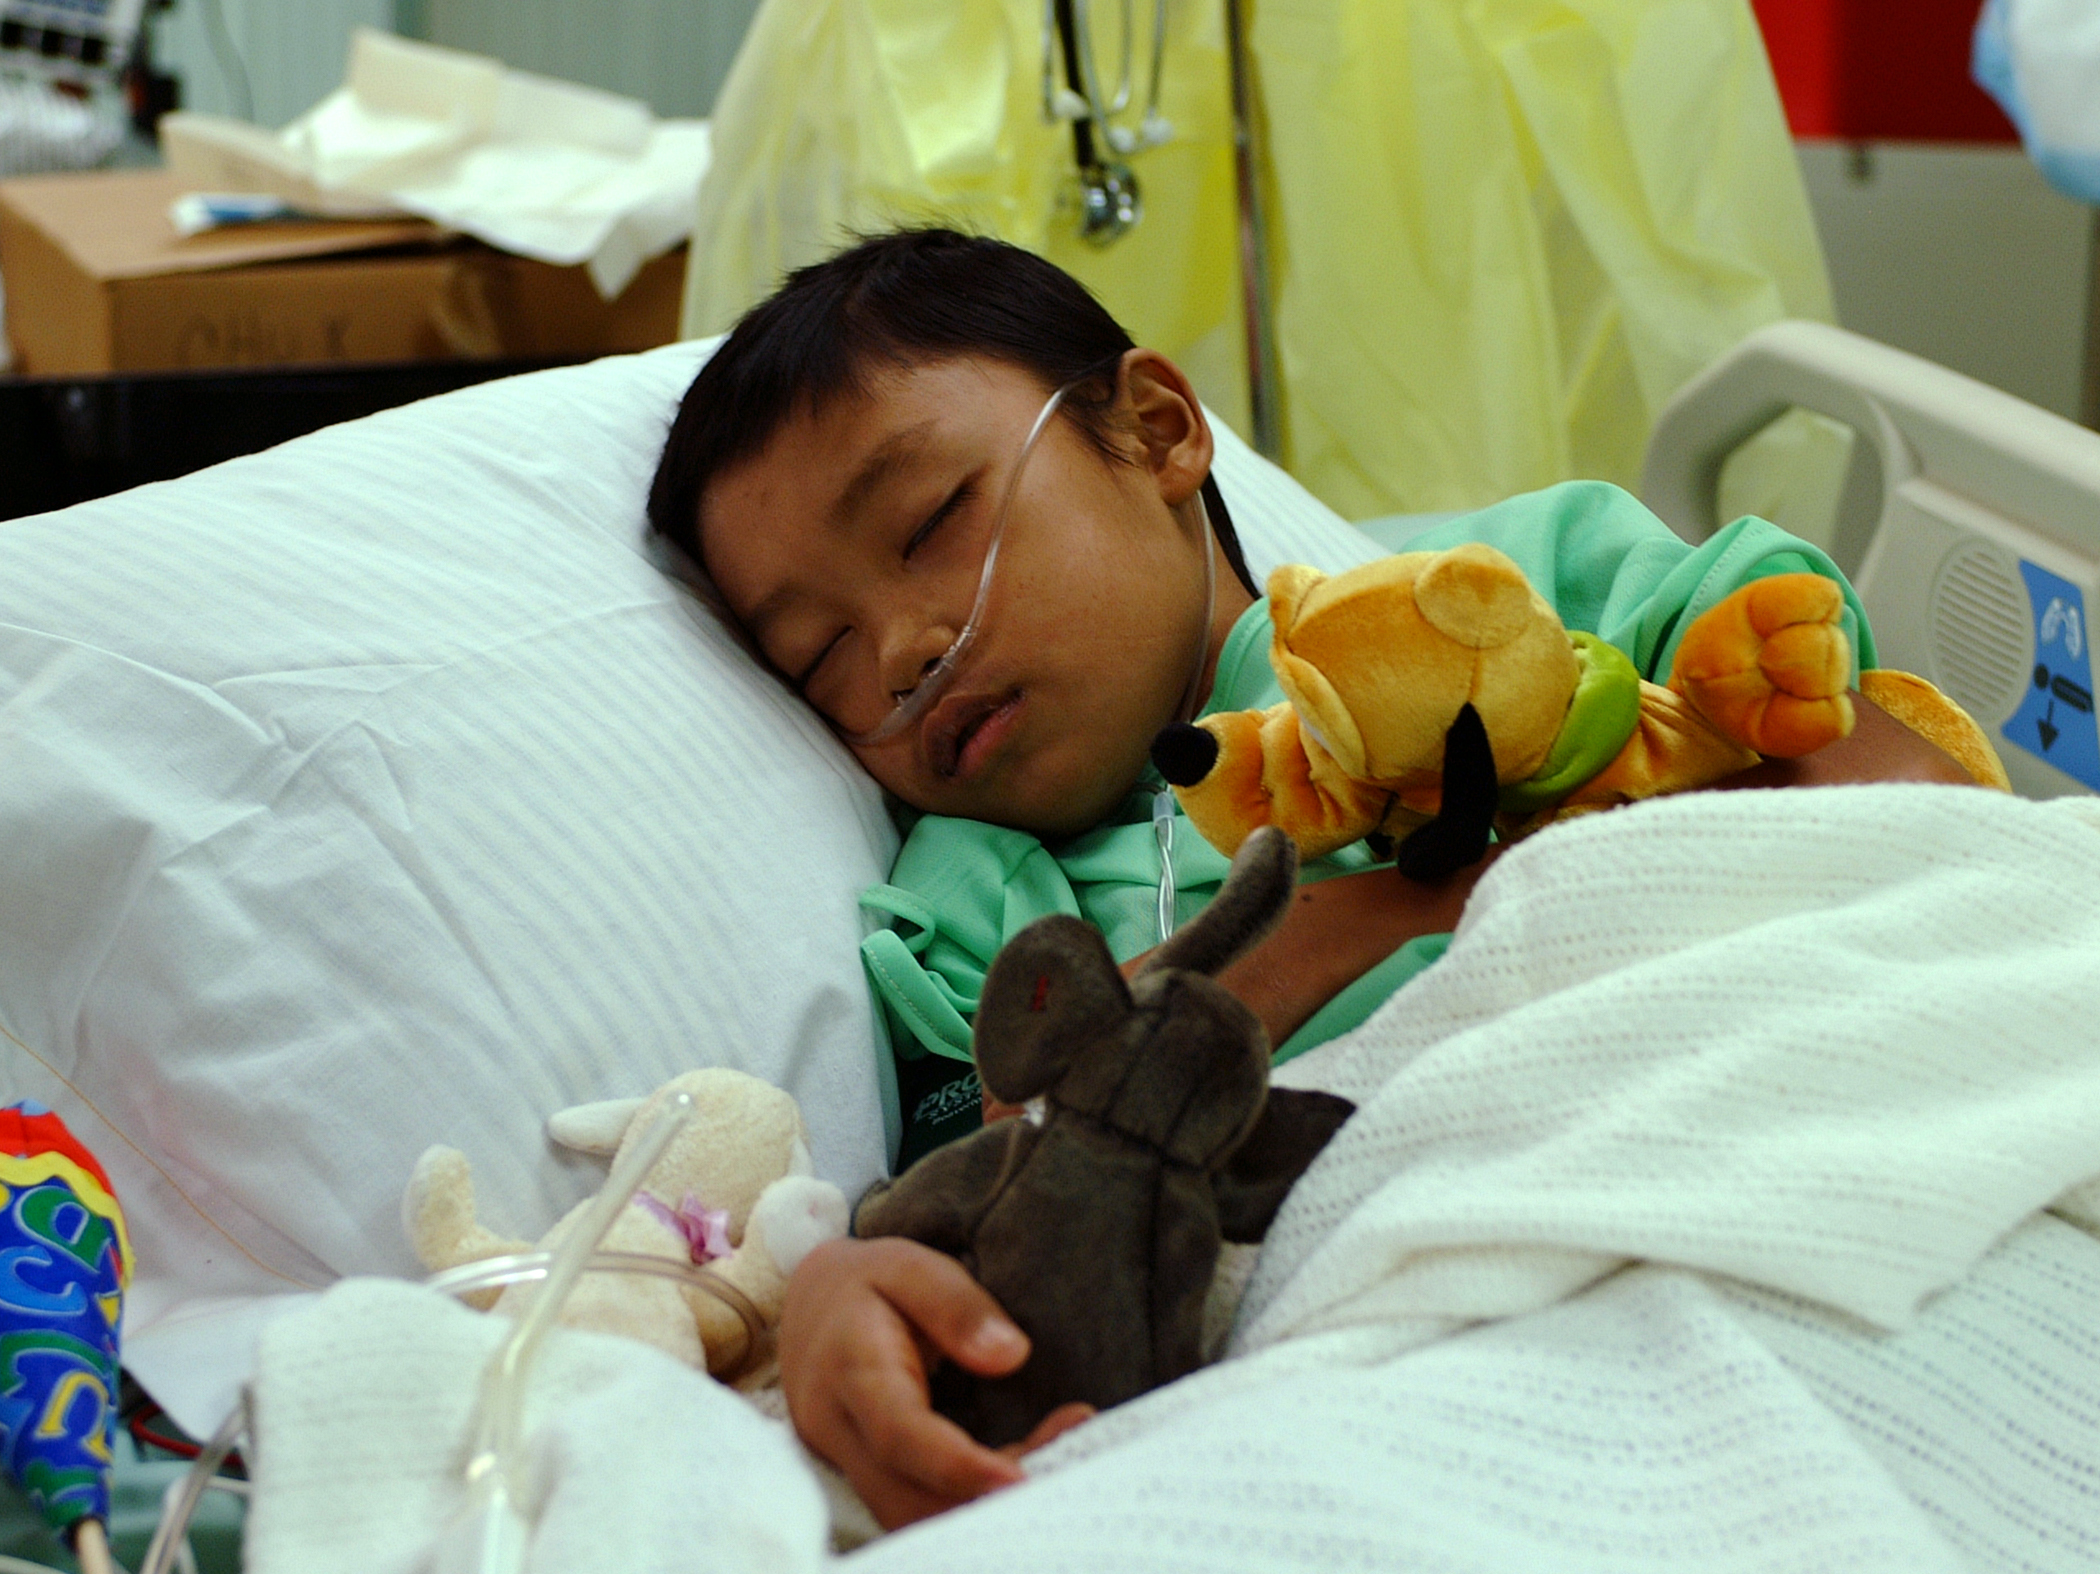 050214-N-0357S-060
Indian Ocean (Feb. 14, 2005) - An 11-year old Indonesian boy rests in a hospital bed in the Intensive Care Unit aboard the Military Sealift Command (MSC) hospital ship USNS Mercy (T-AH 19). The boy was found floating in the ocean two days after the tsunami struck his home of Banda Aceh on the island of Sumatra, Indonesia. Shortly after Mercy arrived on station off the coast of Banda Aceh, the boy was flown to the ship to receive treatment for an acute case of aspiration pneumonia. He is expected to make a full recovery. Mercy is serving as an enabling platform to assist humanitarian operations ashore in ways that host nations and international relief organization find useful. Mercy is currently off the waters of Indonesia in support of Operation Unified Assistance, the humanitarian relief effort to aid the victims of the tsunami that struck Southeast Asia. U.S. Navy photo by Journalist 1st Class Joshua Smith (RELEASED)